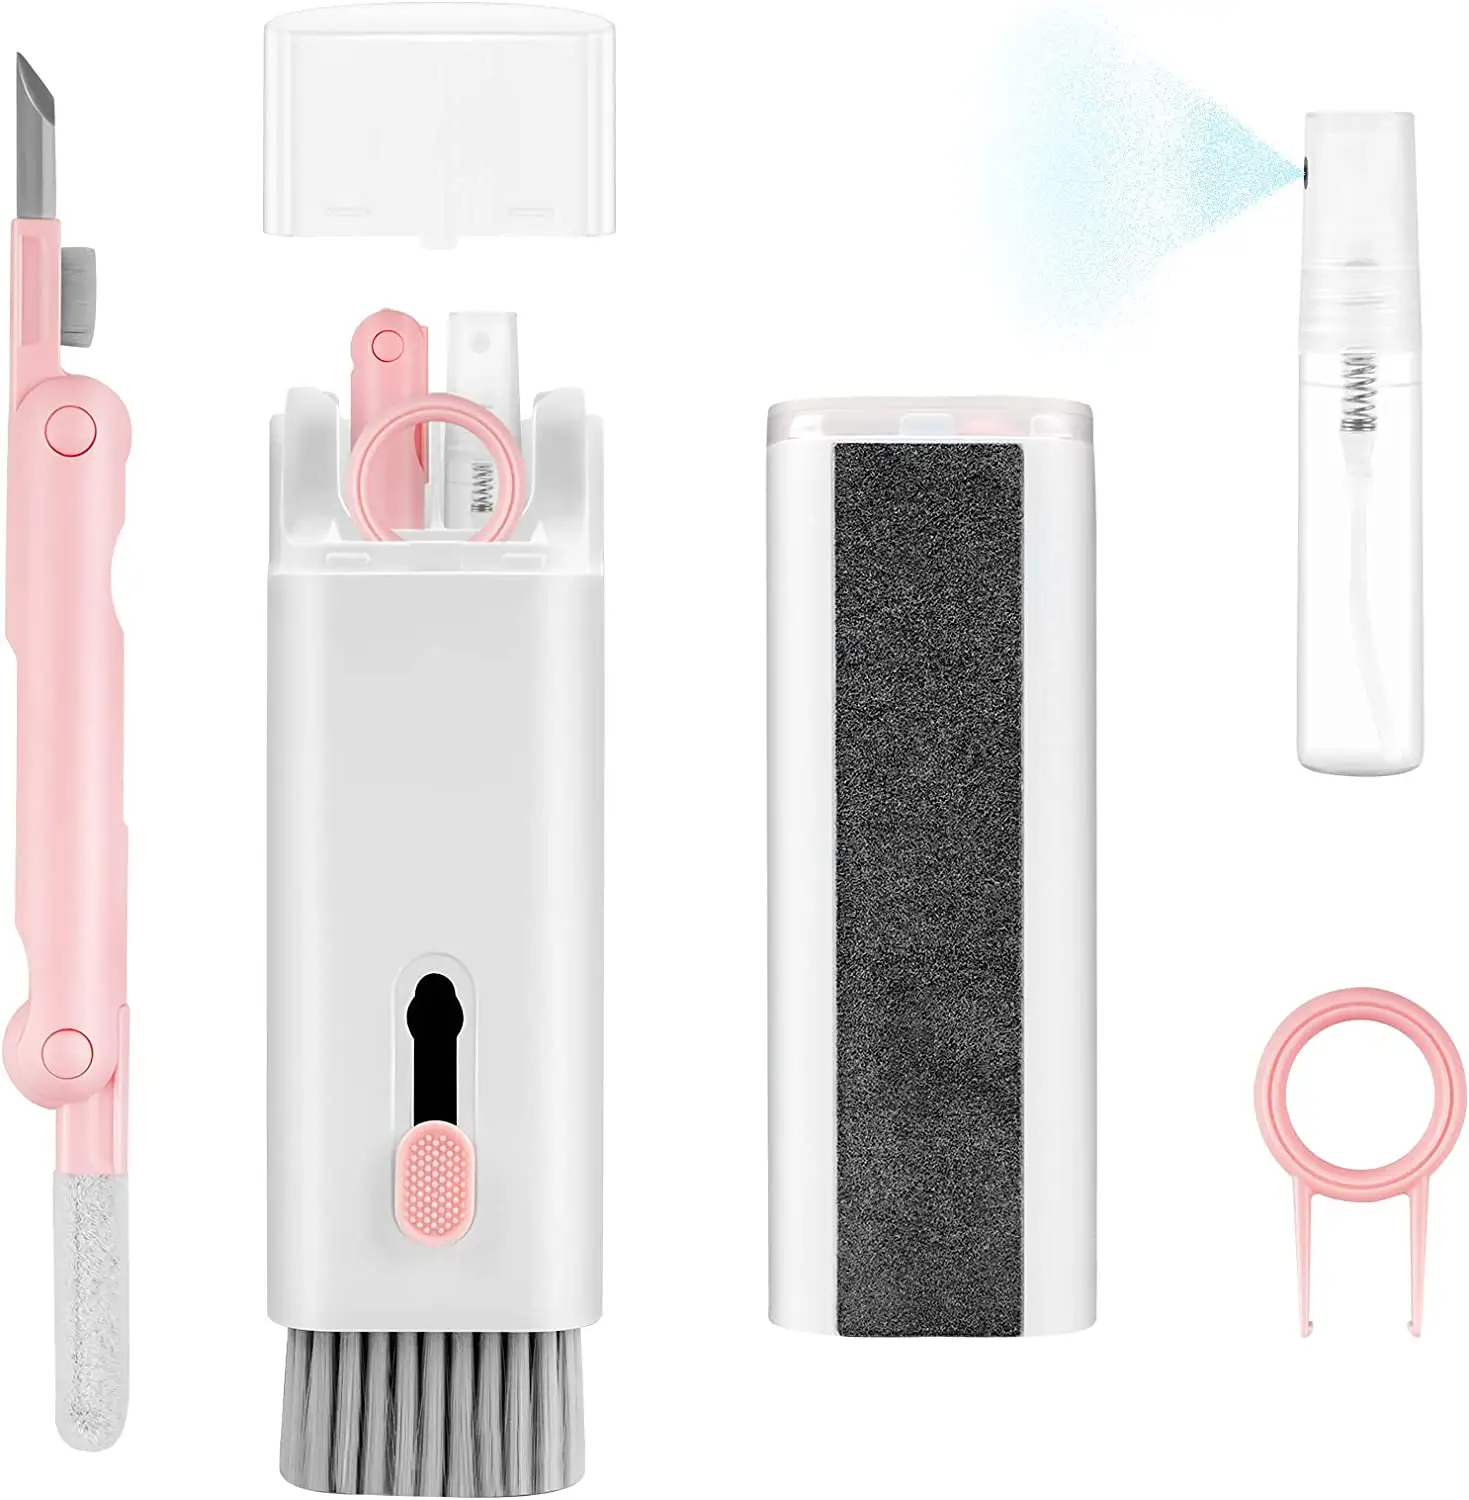 Multifunctional Computer Phone Cleaner Pen Brush Tool Kit 7 In 1 Airpods Earphone Keyboard Cleaning With Keycap Puller